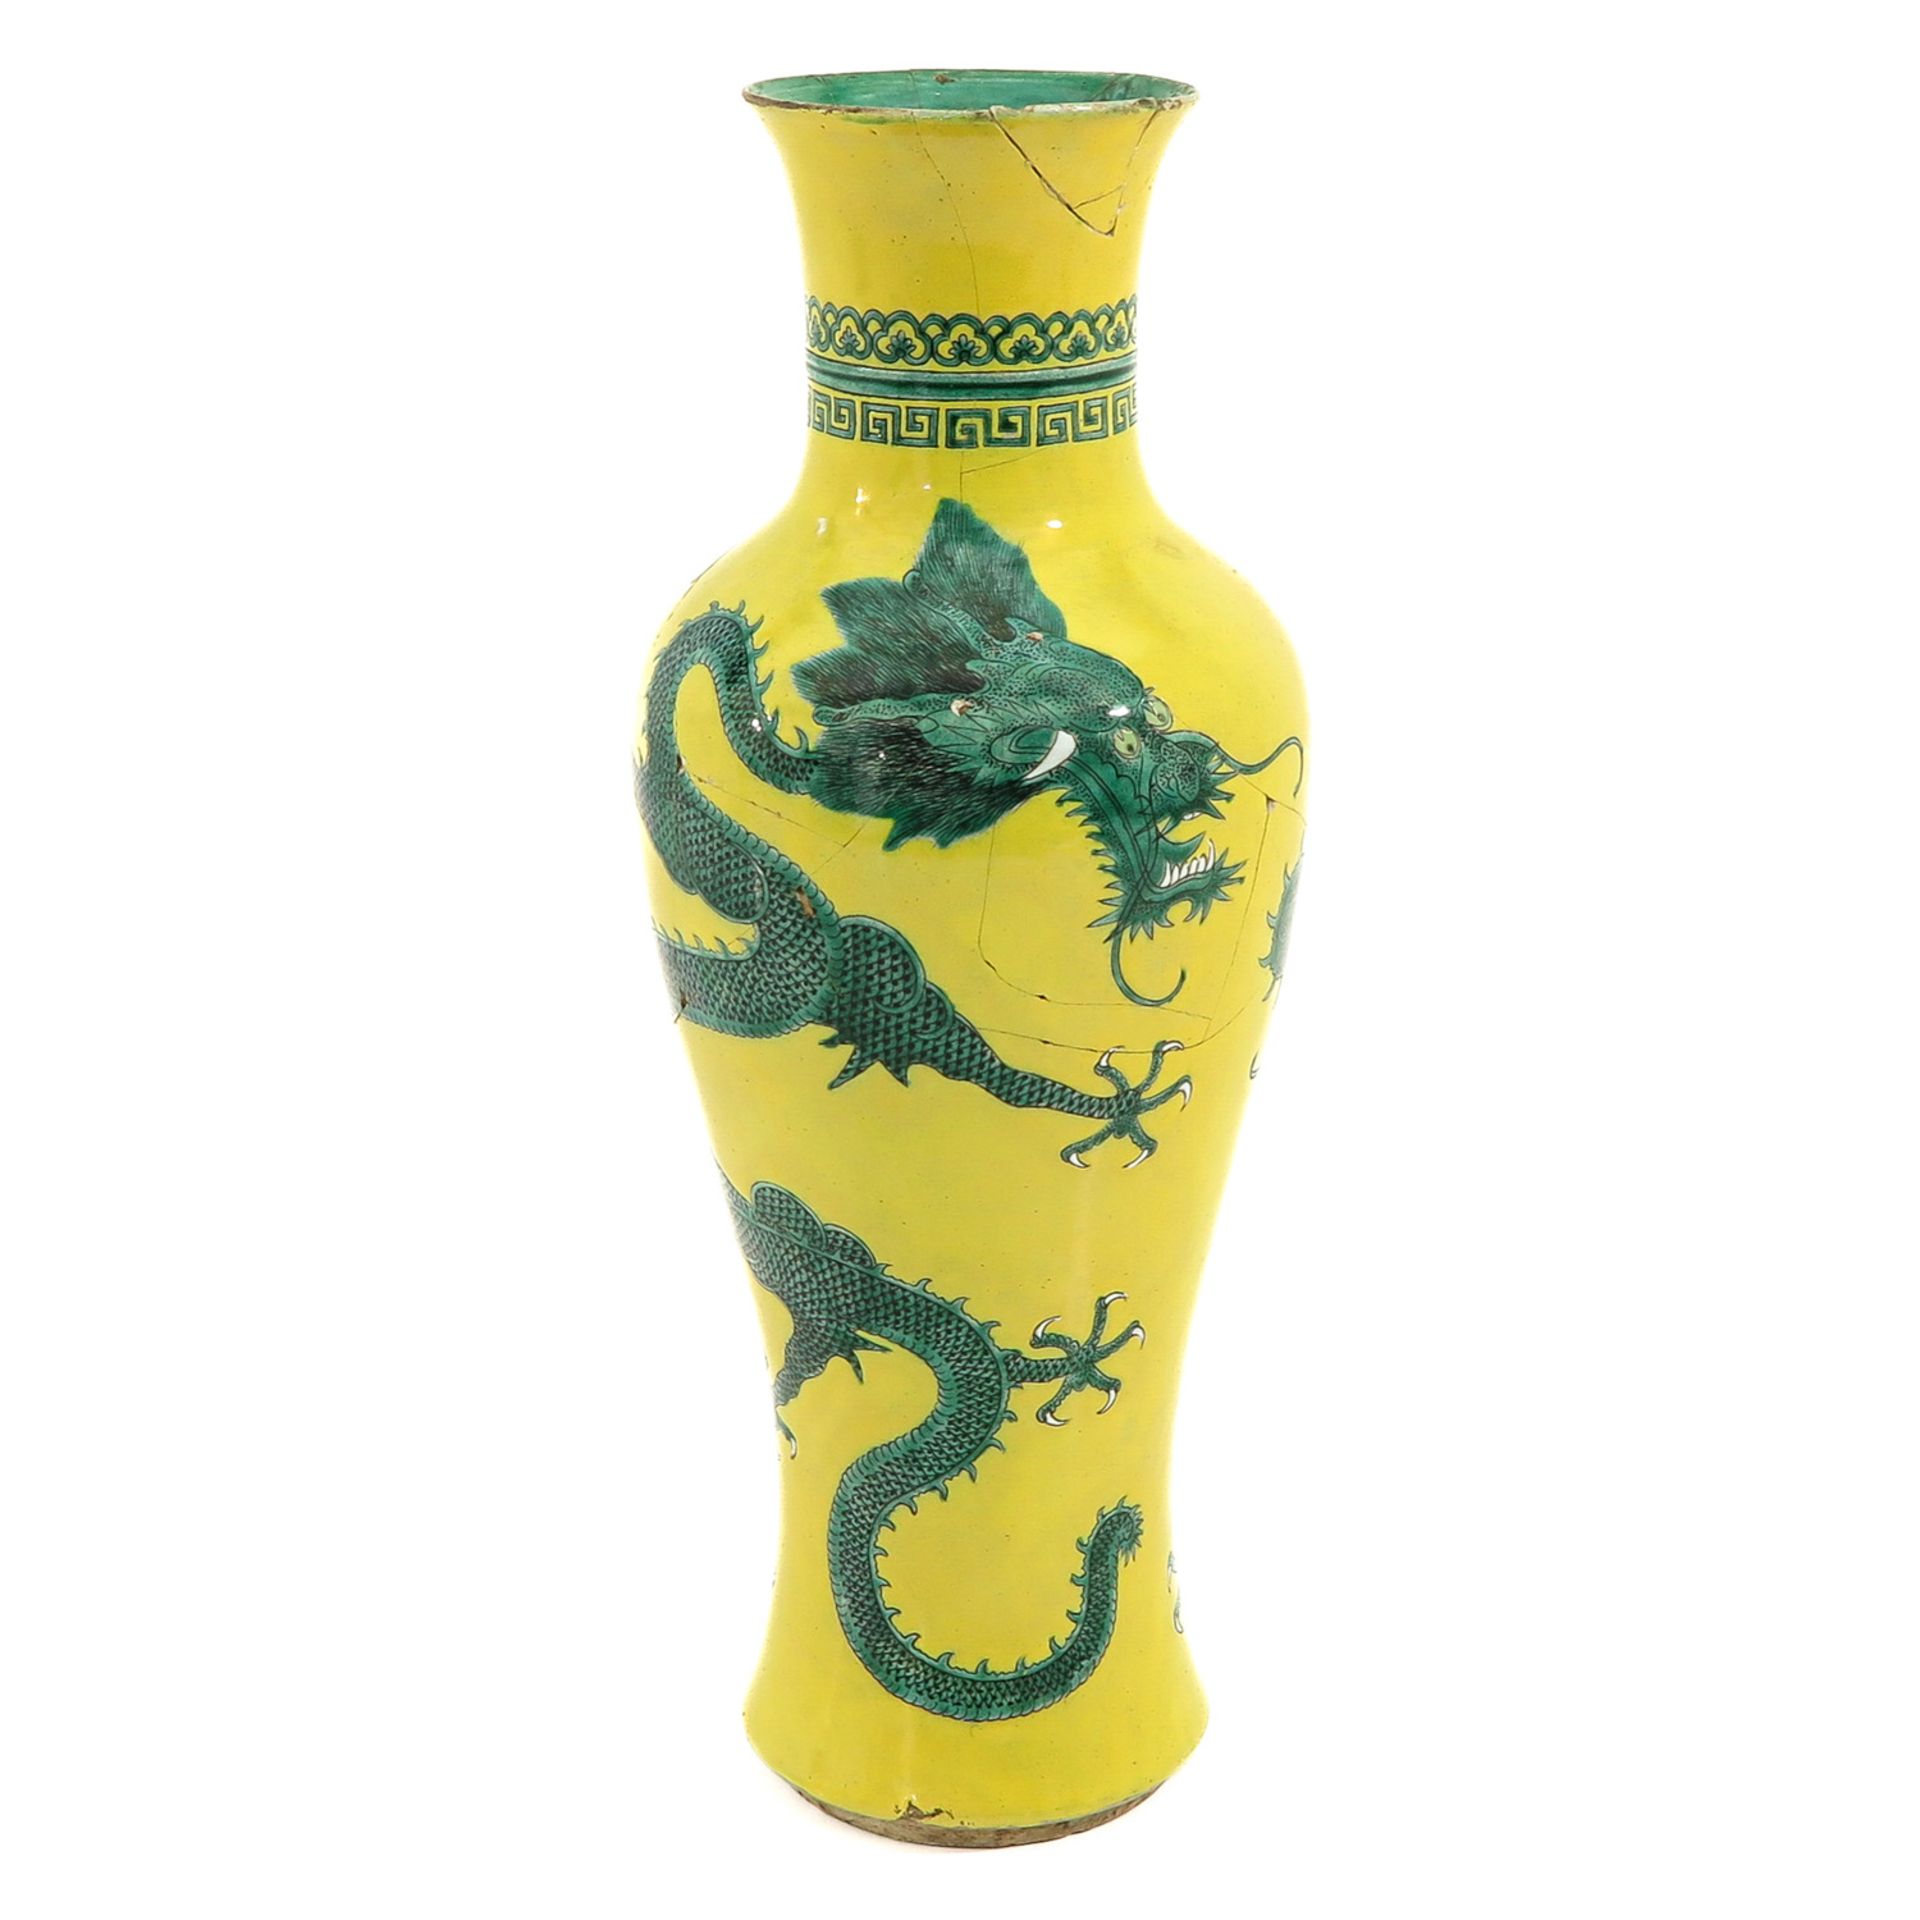 A Yellow and Green Dragon Vase